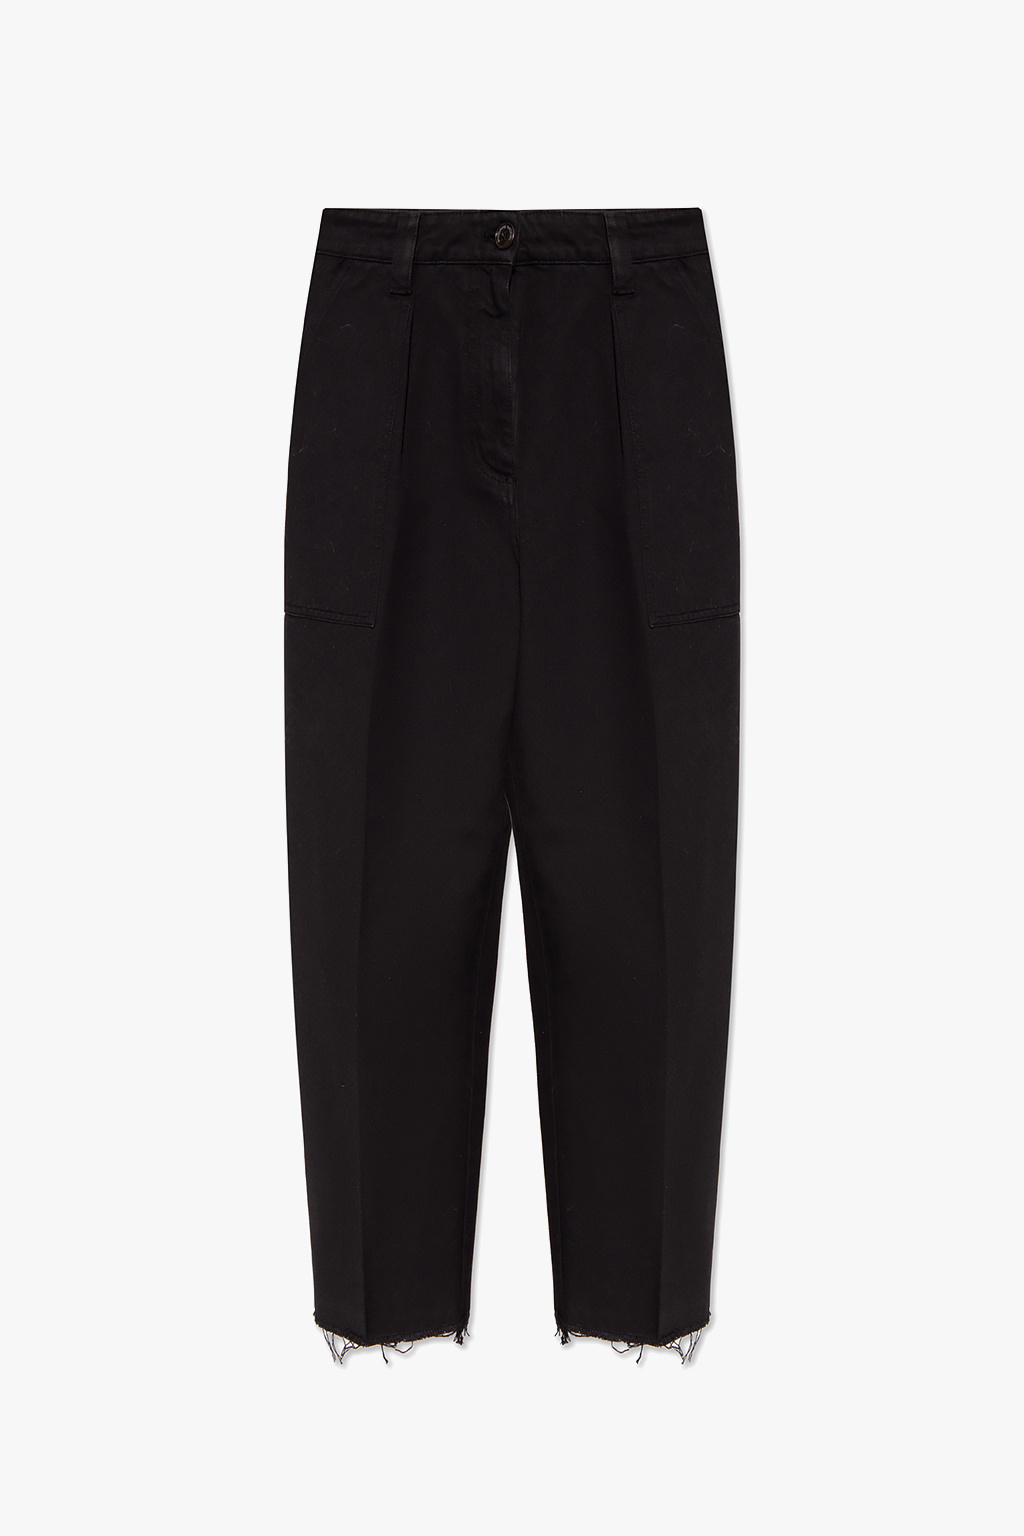 Philippe Model ‘Coline’ trousers